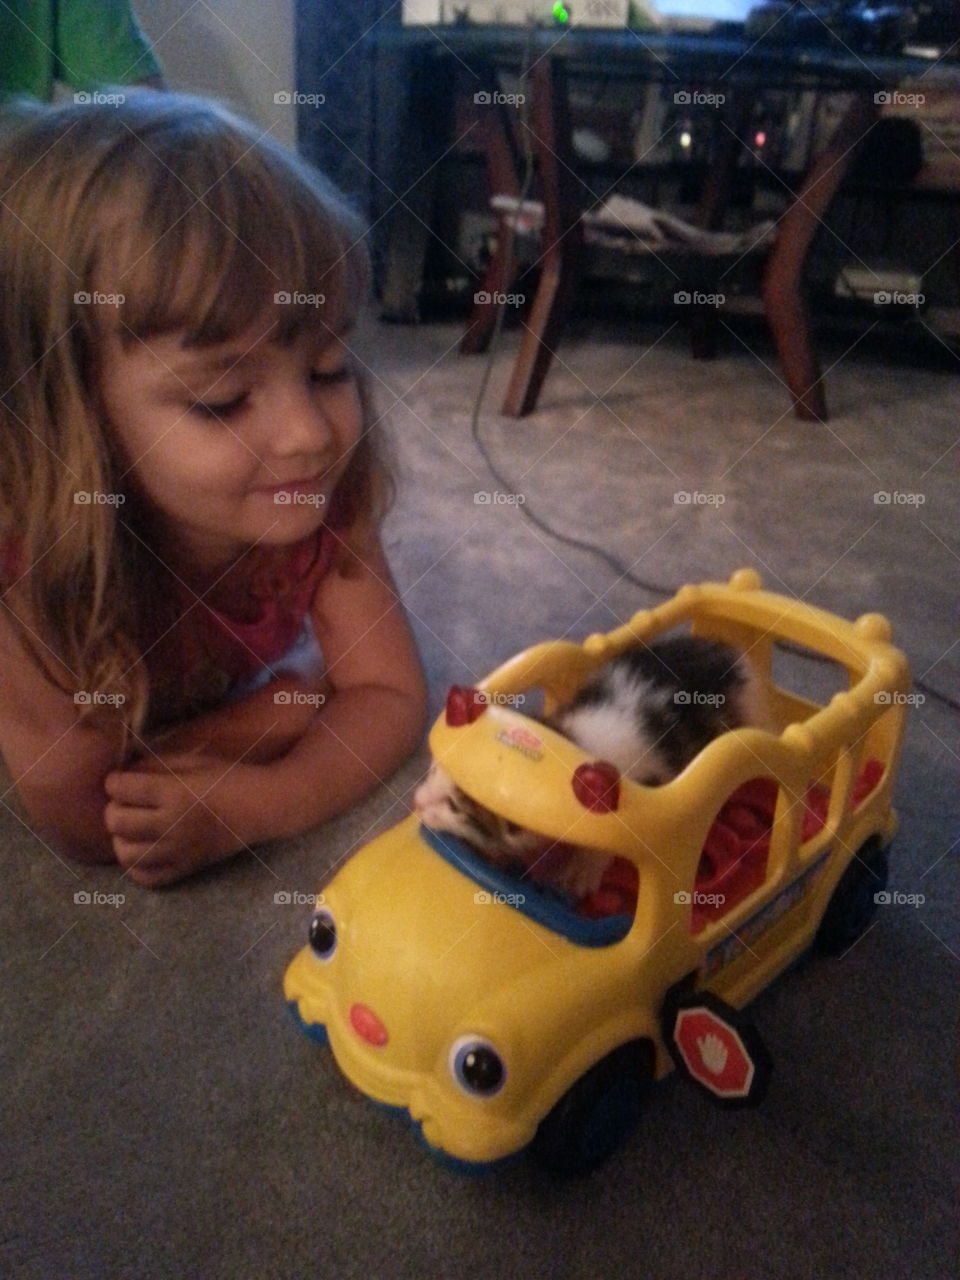 Kittens first day of school. my niece playing with a kitten